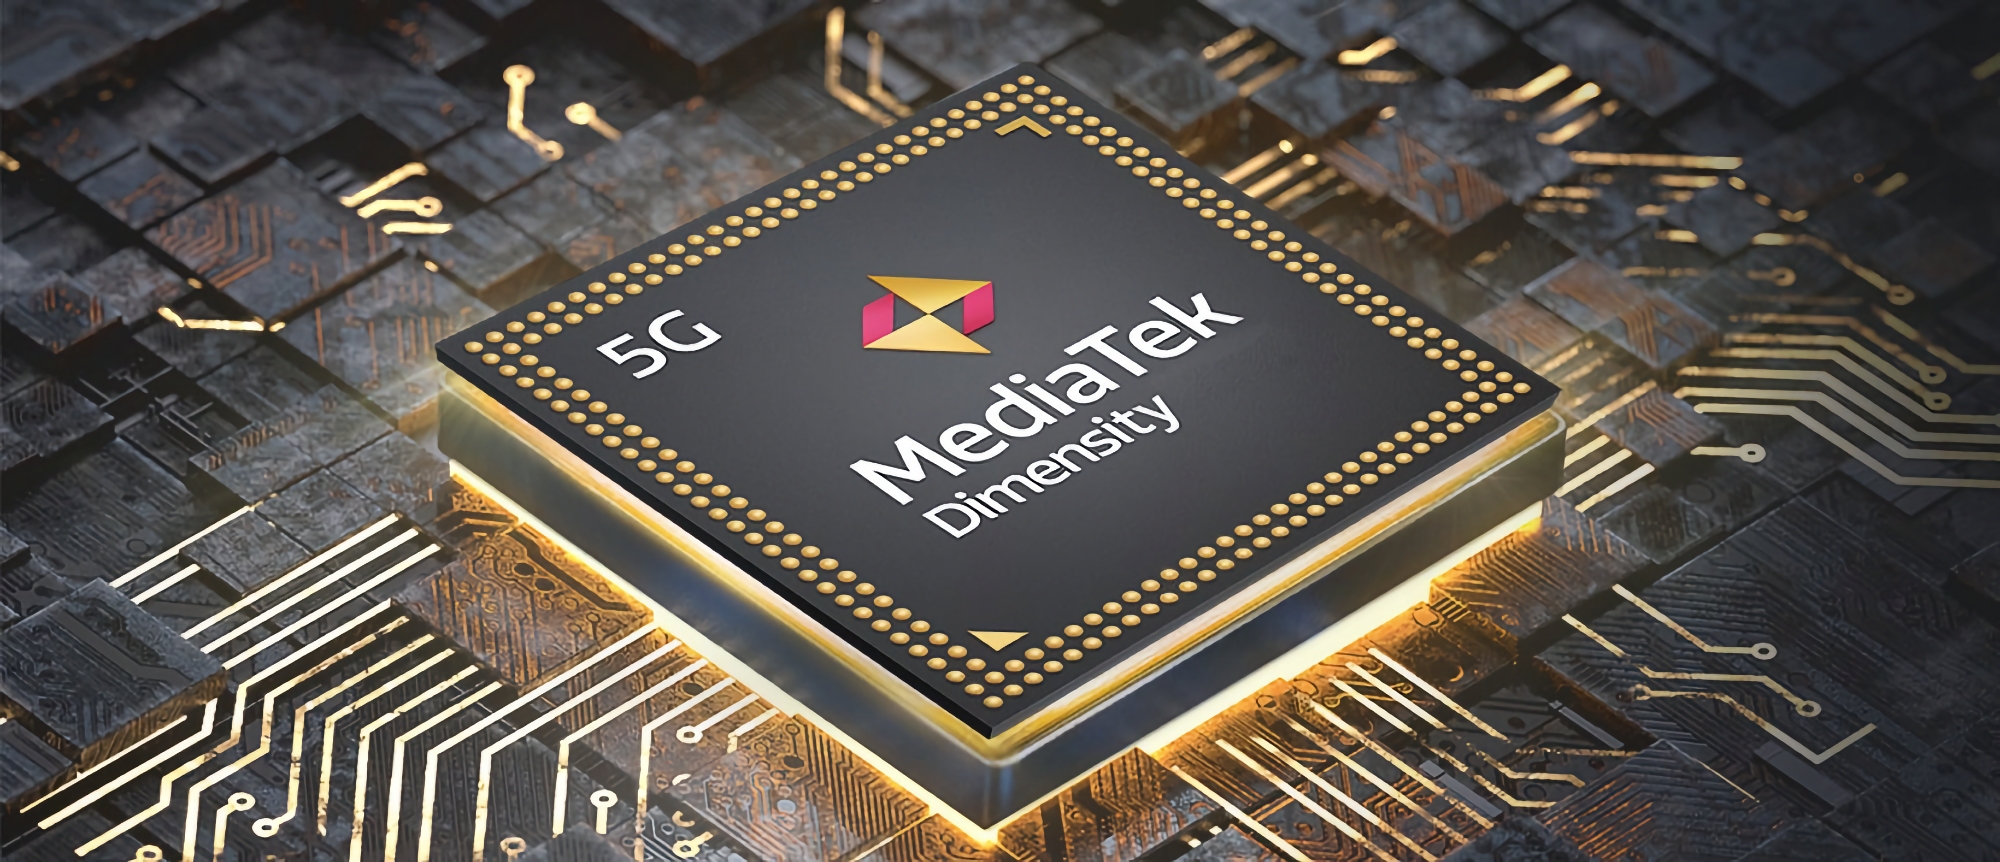 MediaTek is preparing to release the Dimensity 8300 chip, it will be a simplified version of the flagship SoC Dimensity 9300